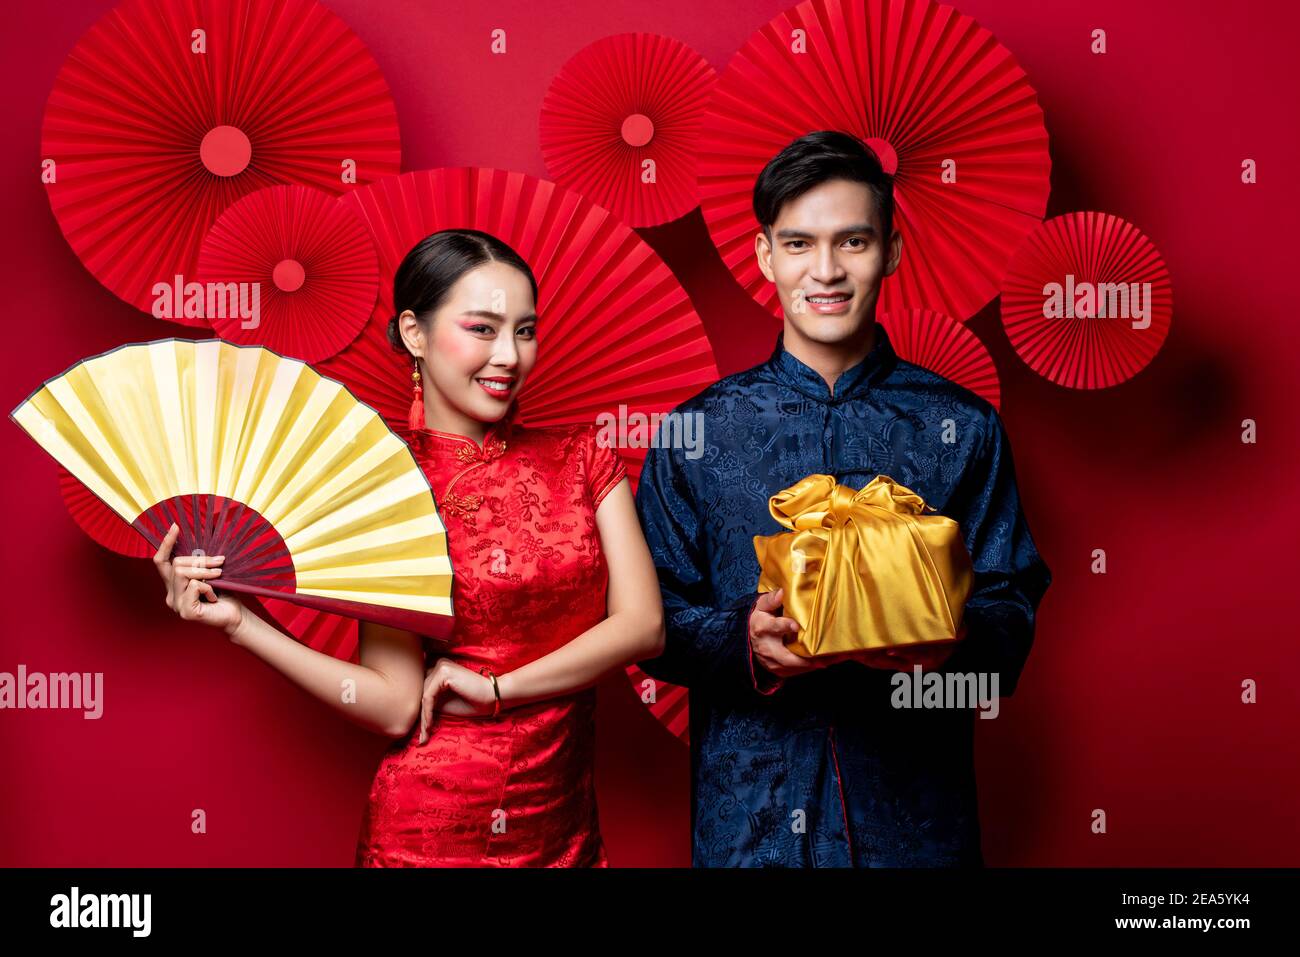 Smiling Asian couple in traditional costumes with fan and gold package as a gift for Chinese new year in oriental style red background Stock Photo